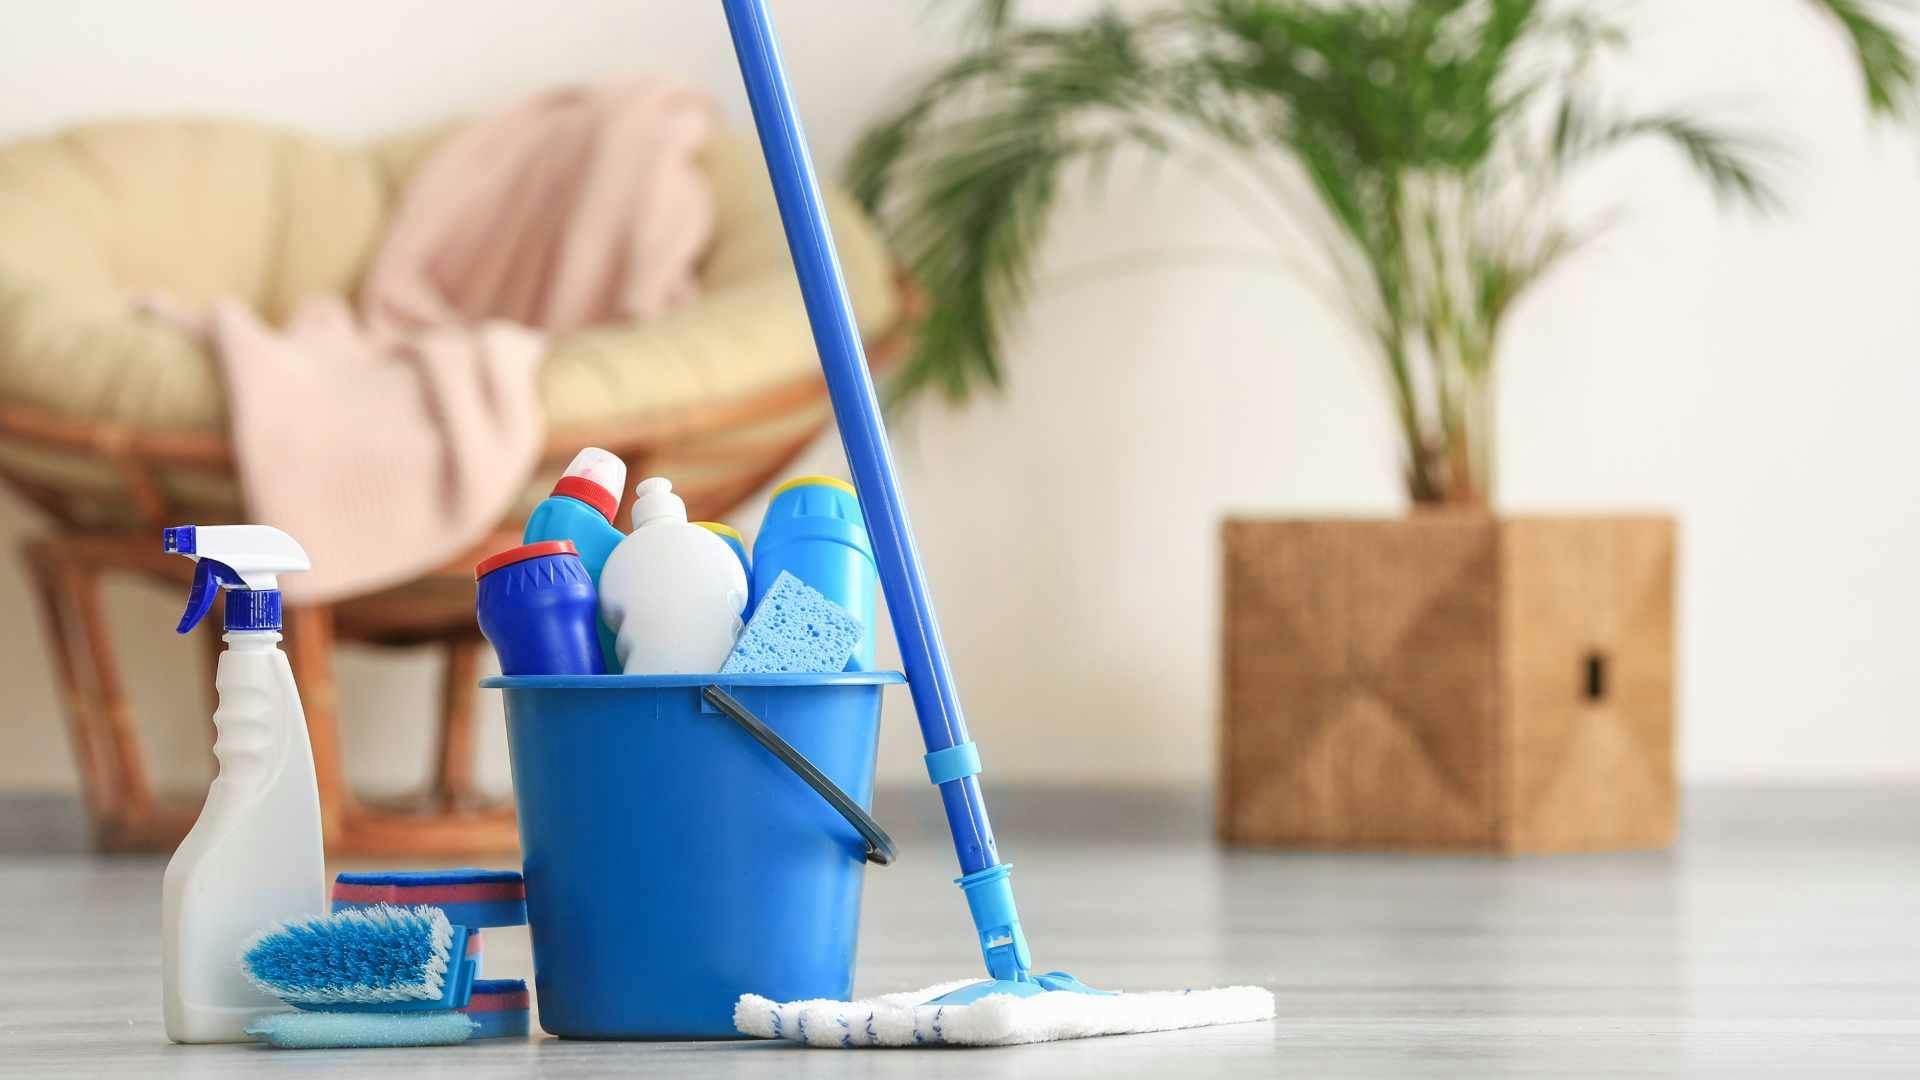 Best Cleaning Supplies and Cleaning Products for Home: Mop, Cleaning Spray